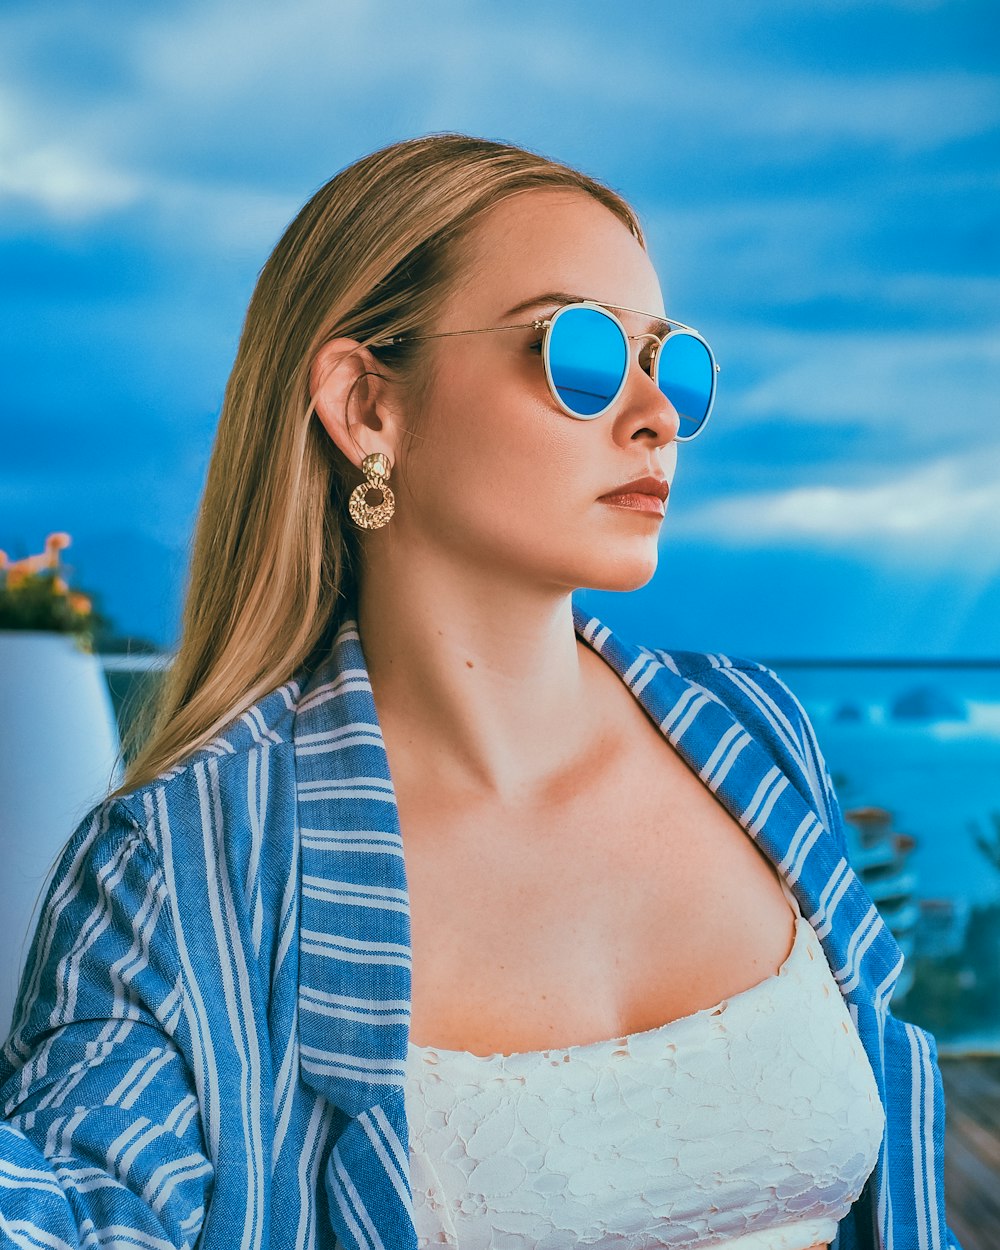 woman in blue and white striped shirt wearing aviator sunglasses